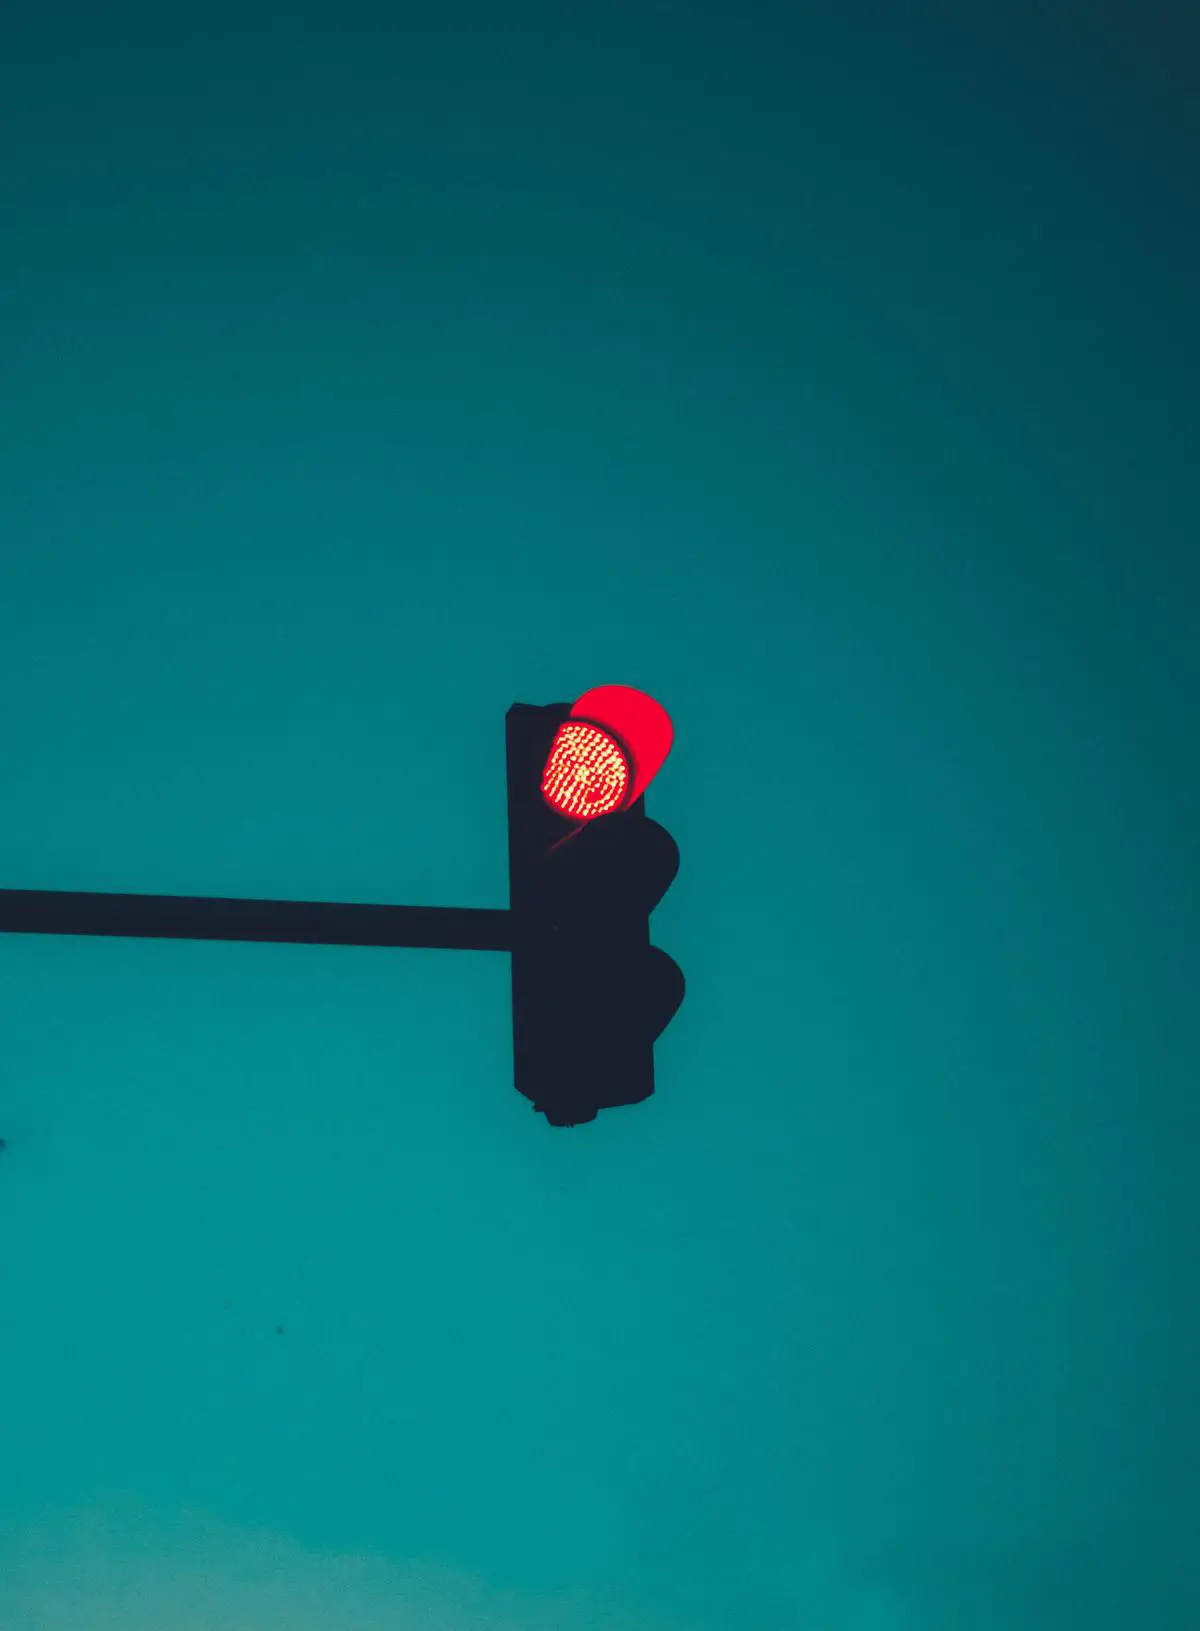 image of a broken traffic signal at an intersection